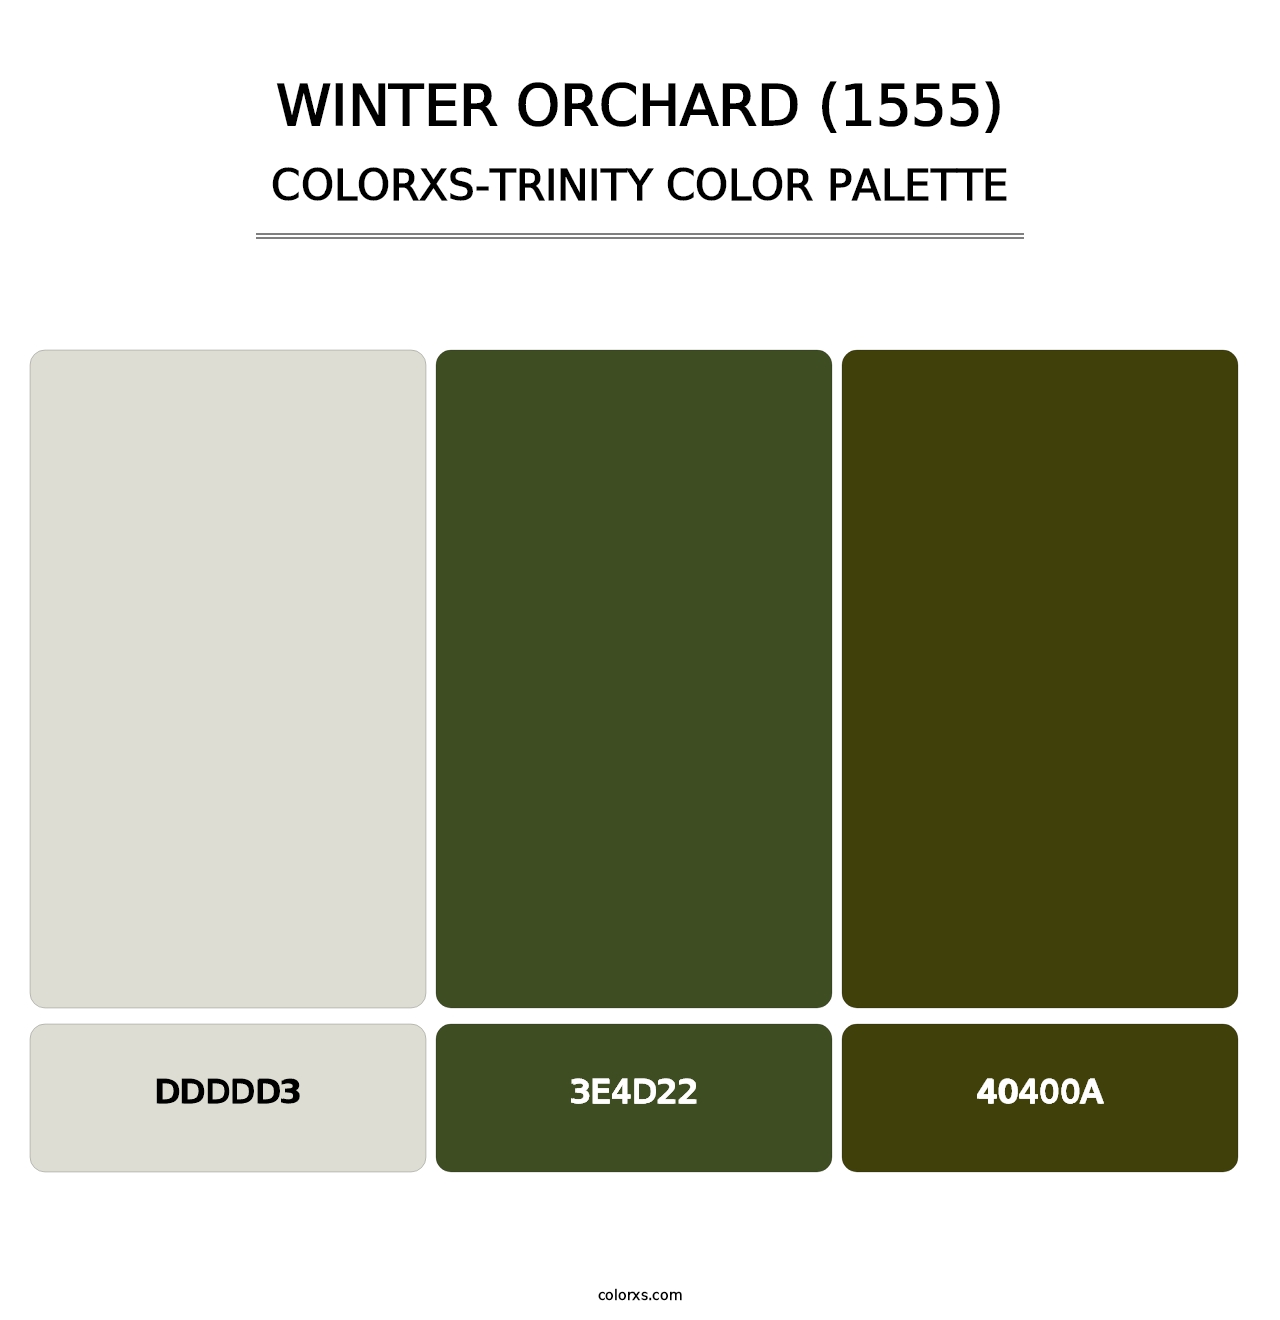 Winter Orchard (1555) - Colorxs Trinity Palette